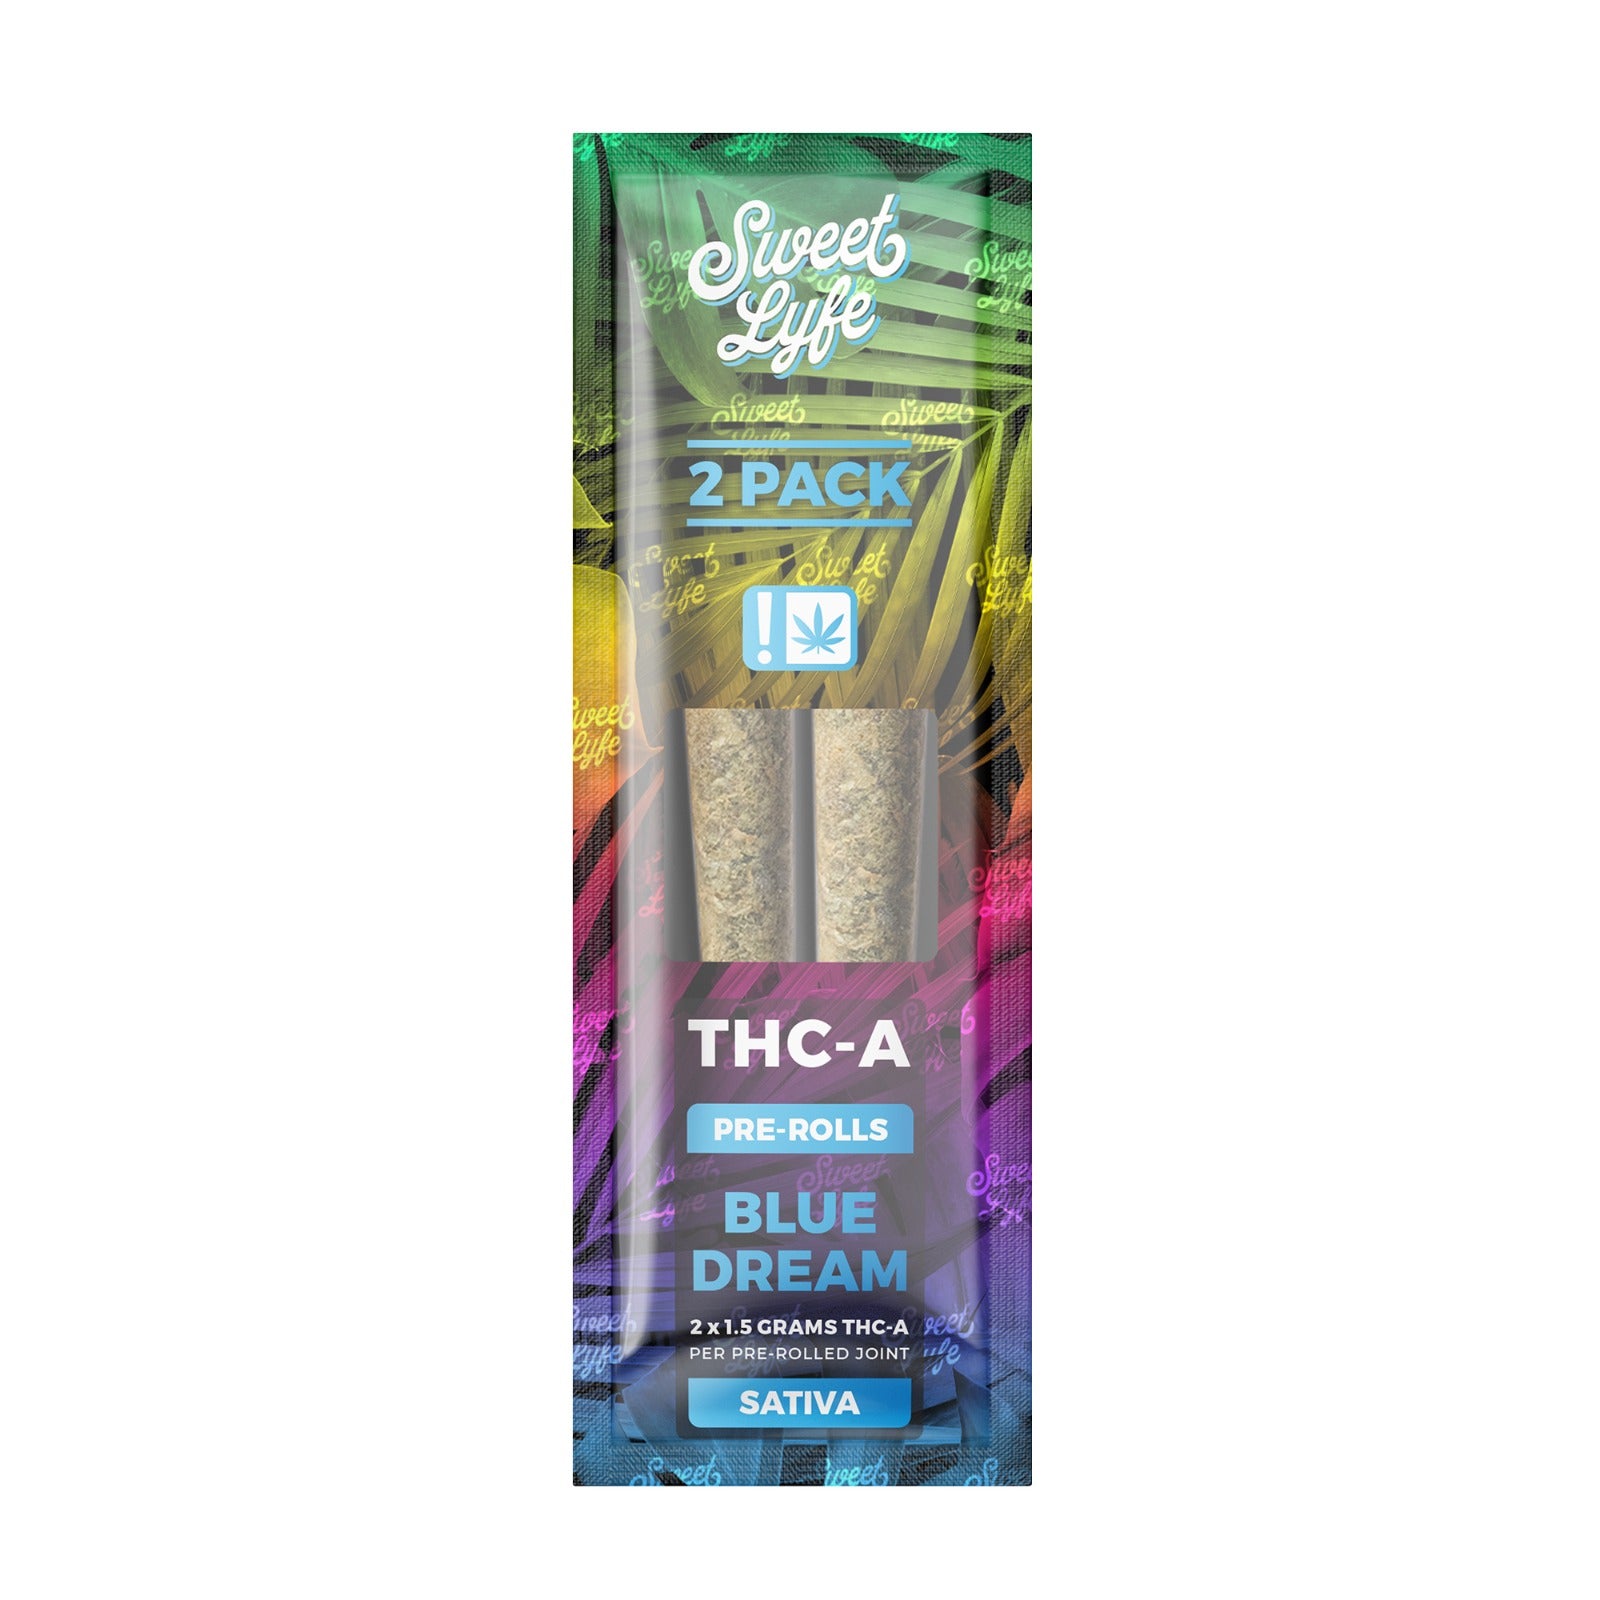 2 Pack Pre-Rolls Joint THC-A|Blue Dream - Sativa